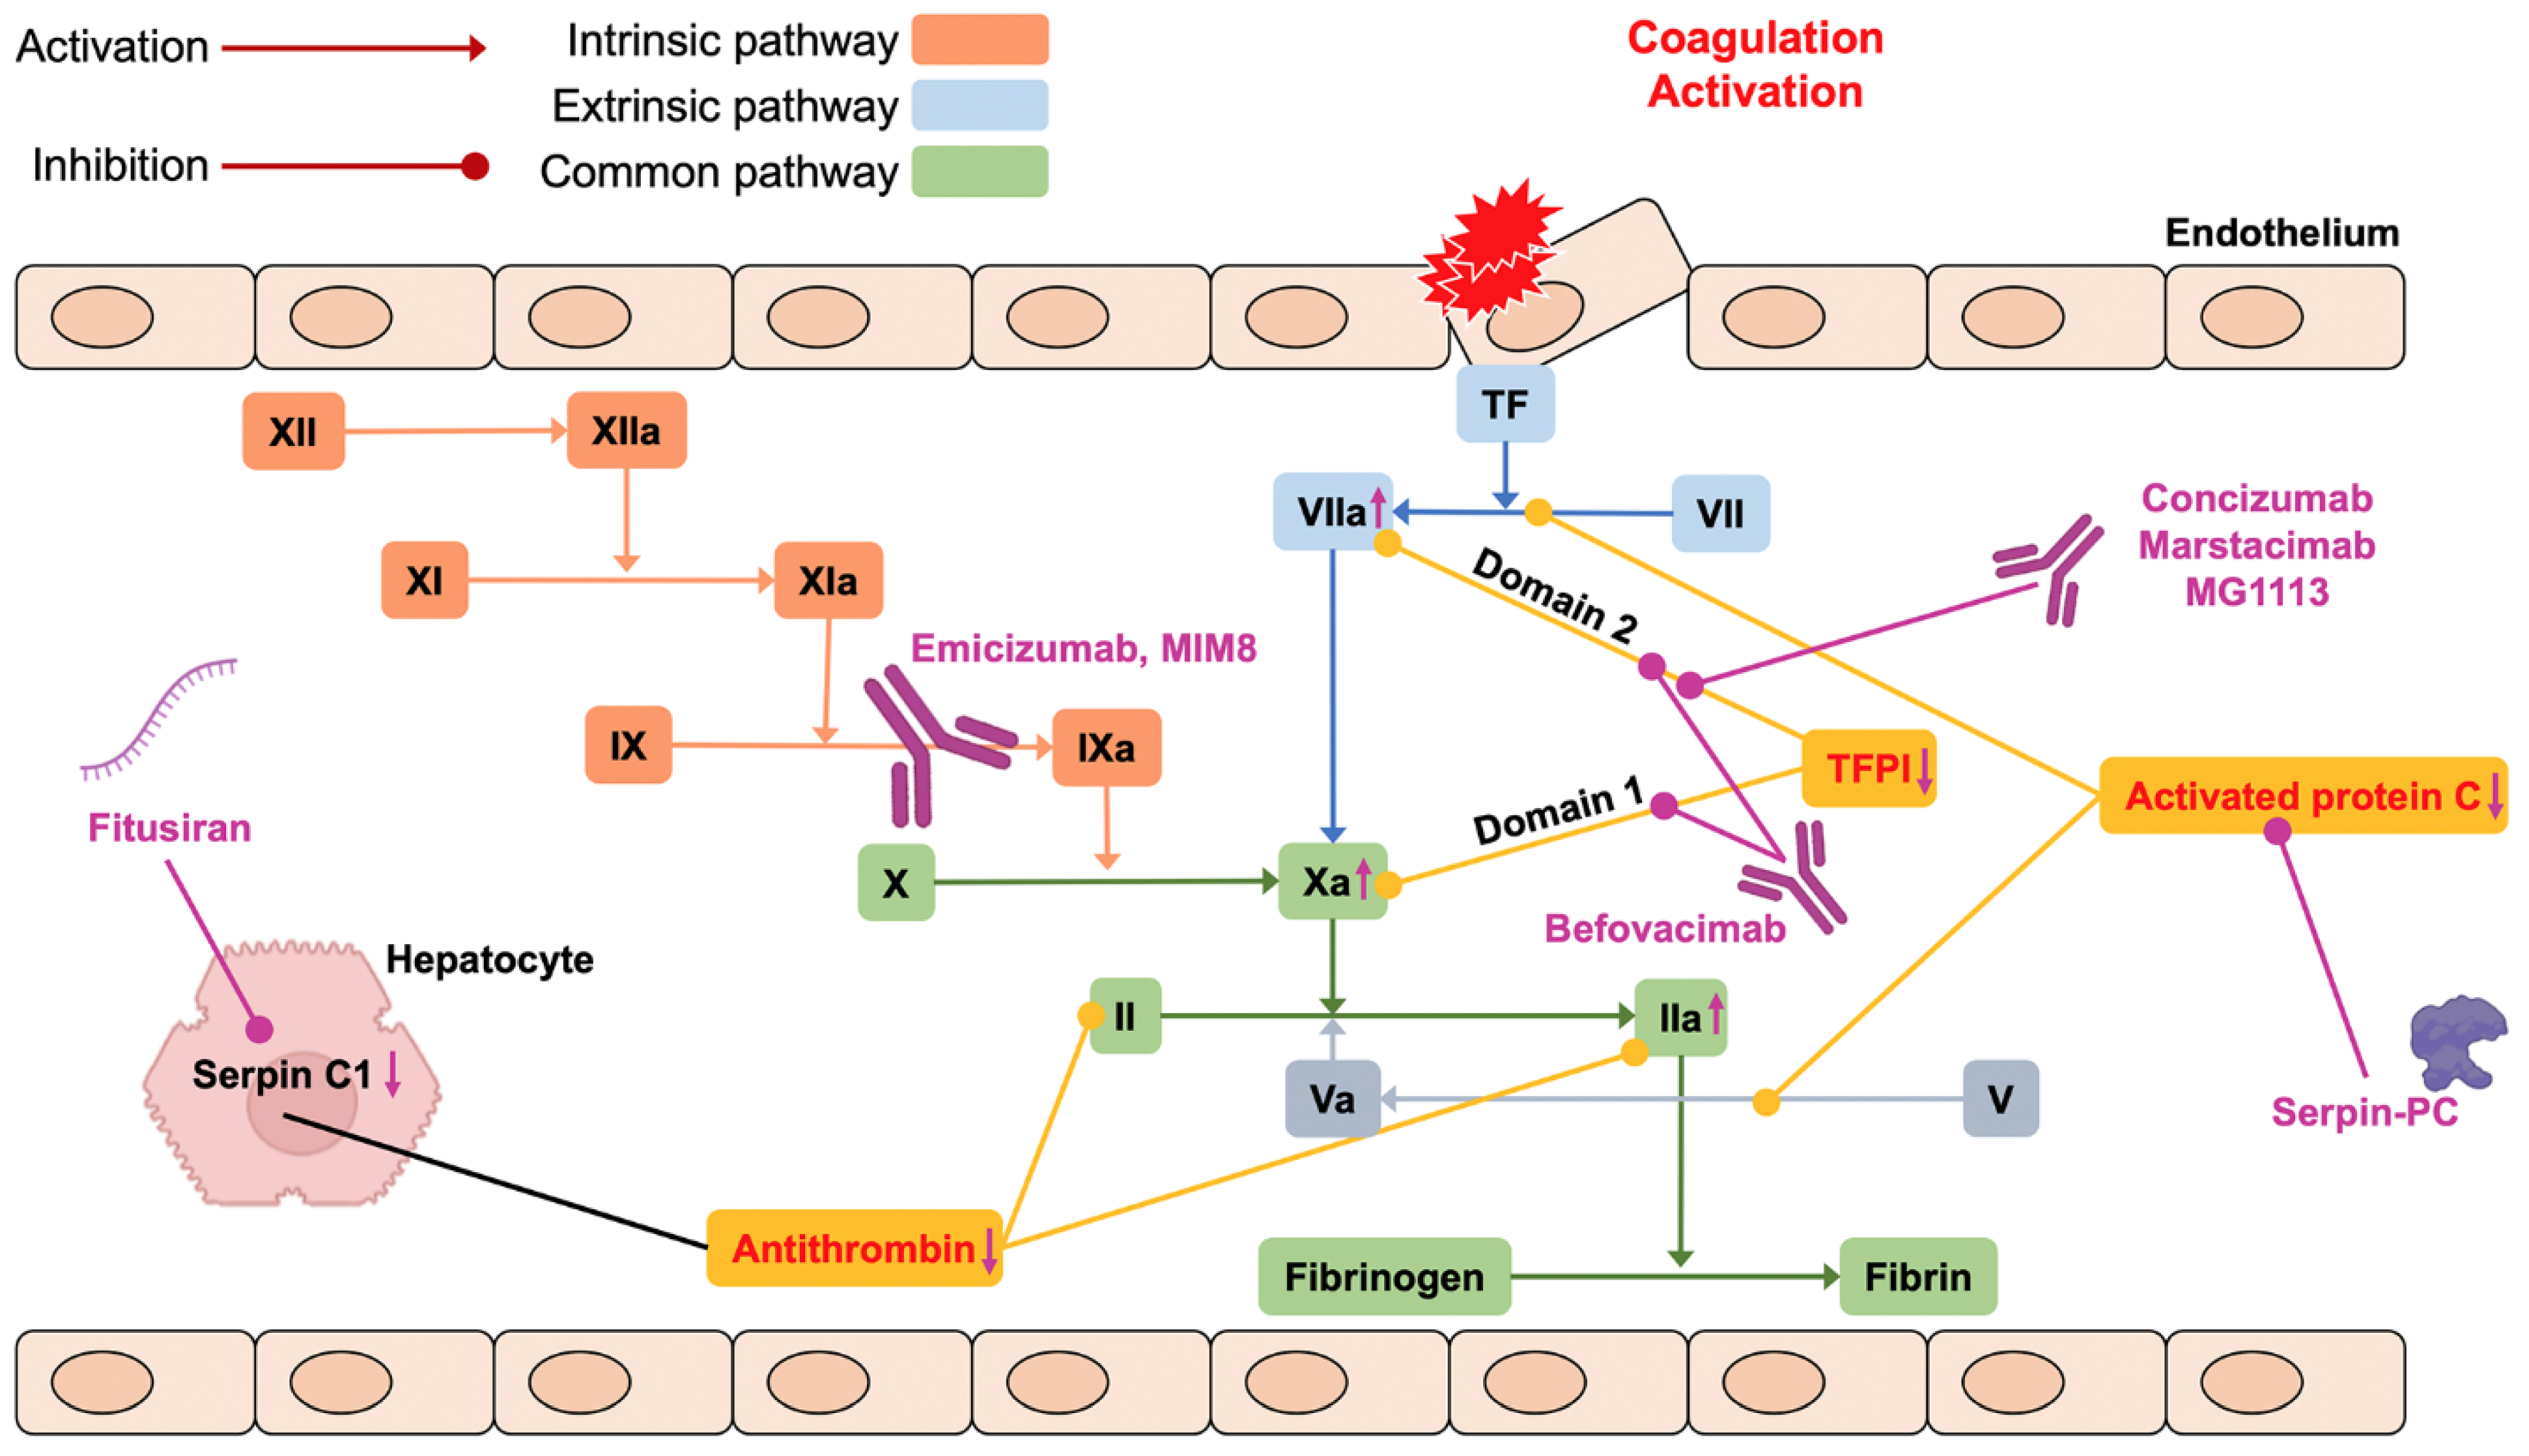 Thrombin generation and implications for hemophilia therapies: A